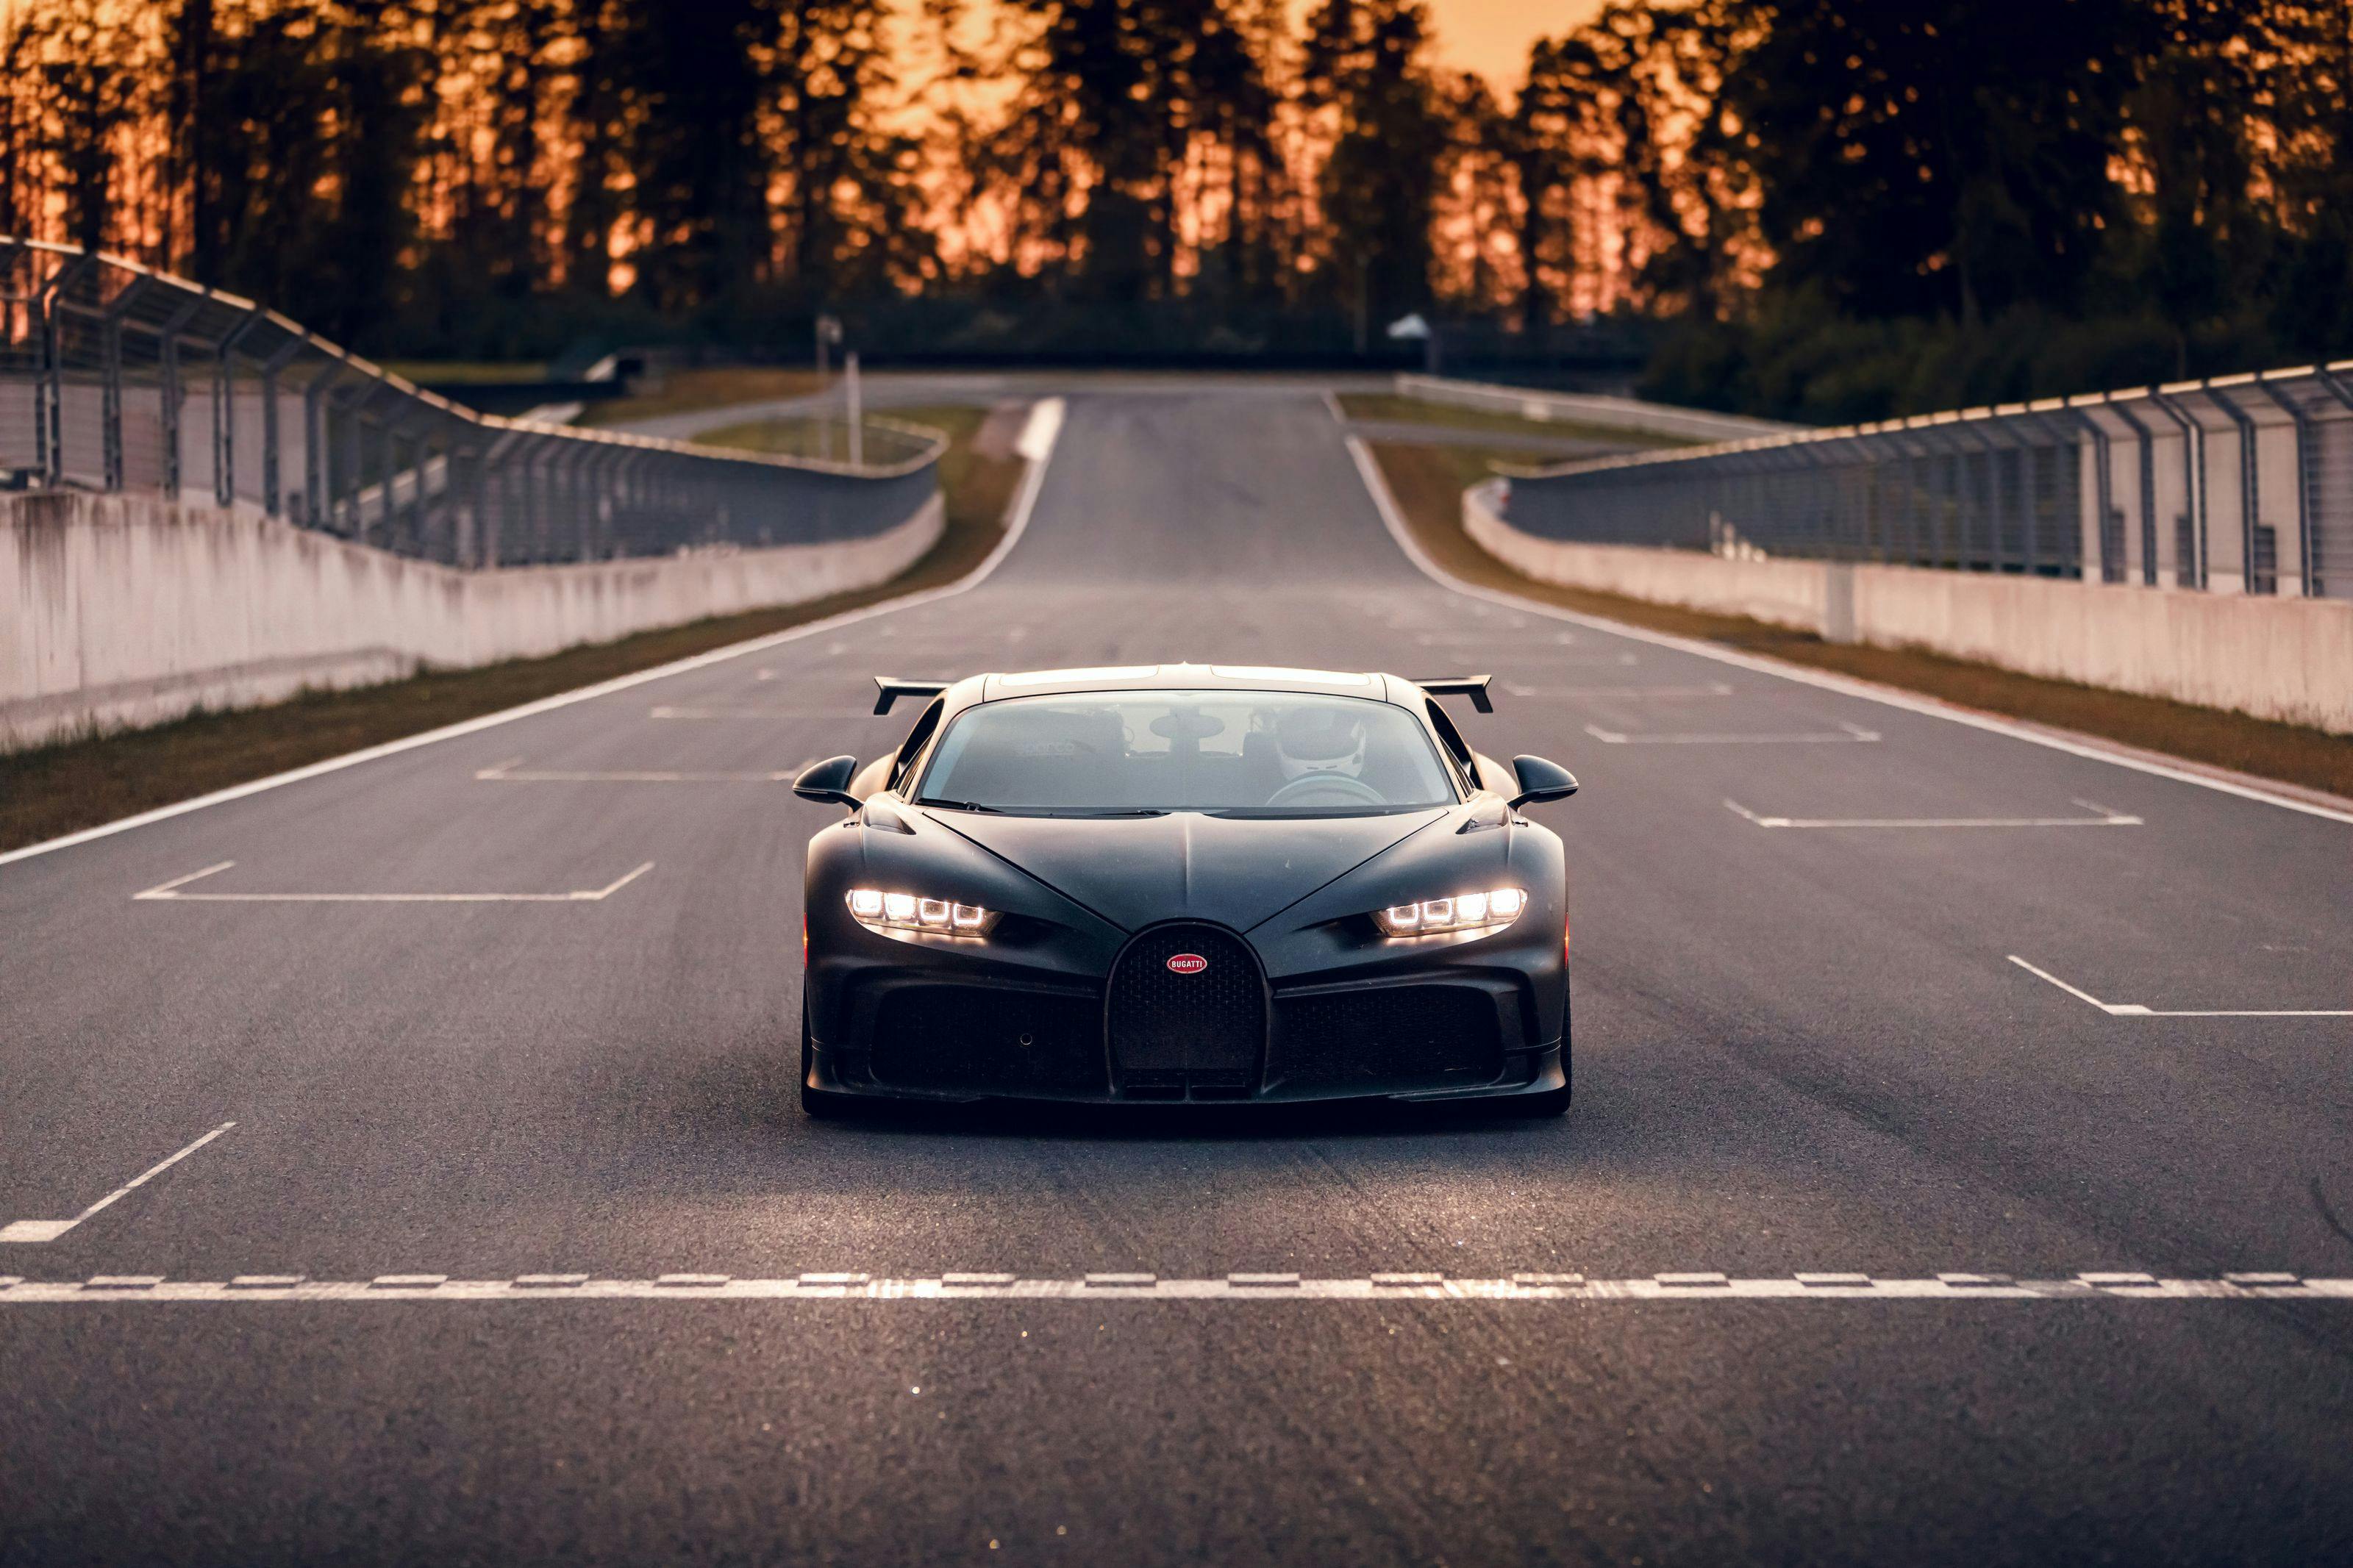 The technology of the Bugatti Chiron Pur Sport in detail